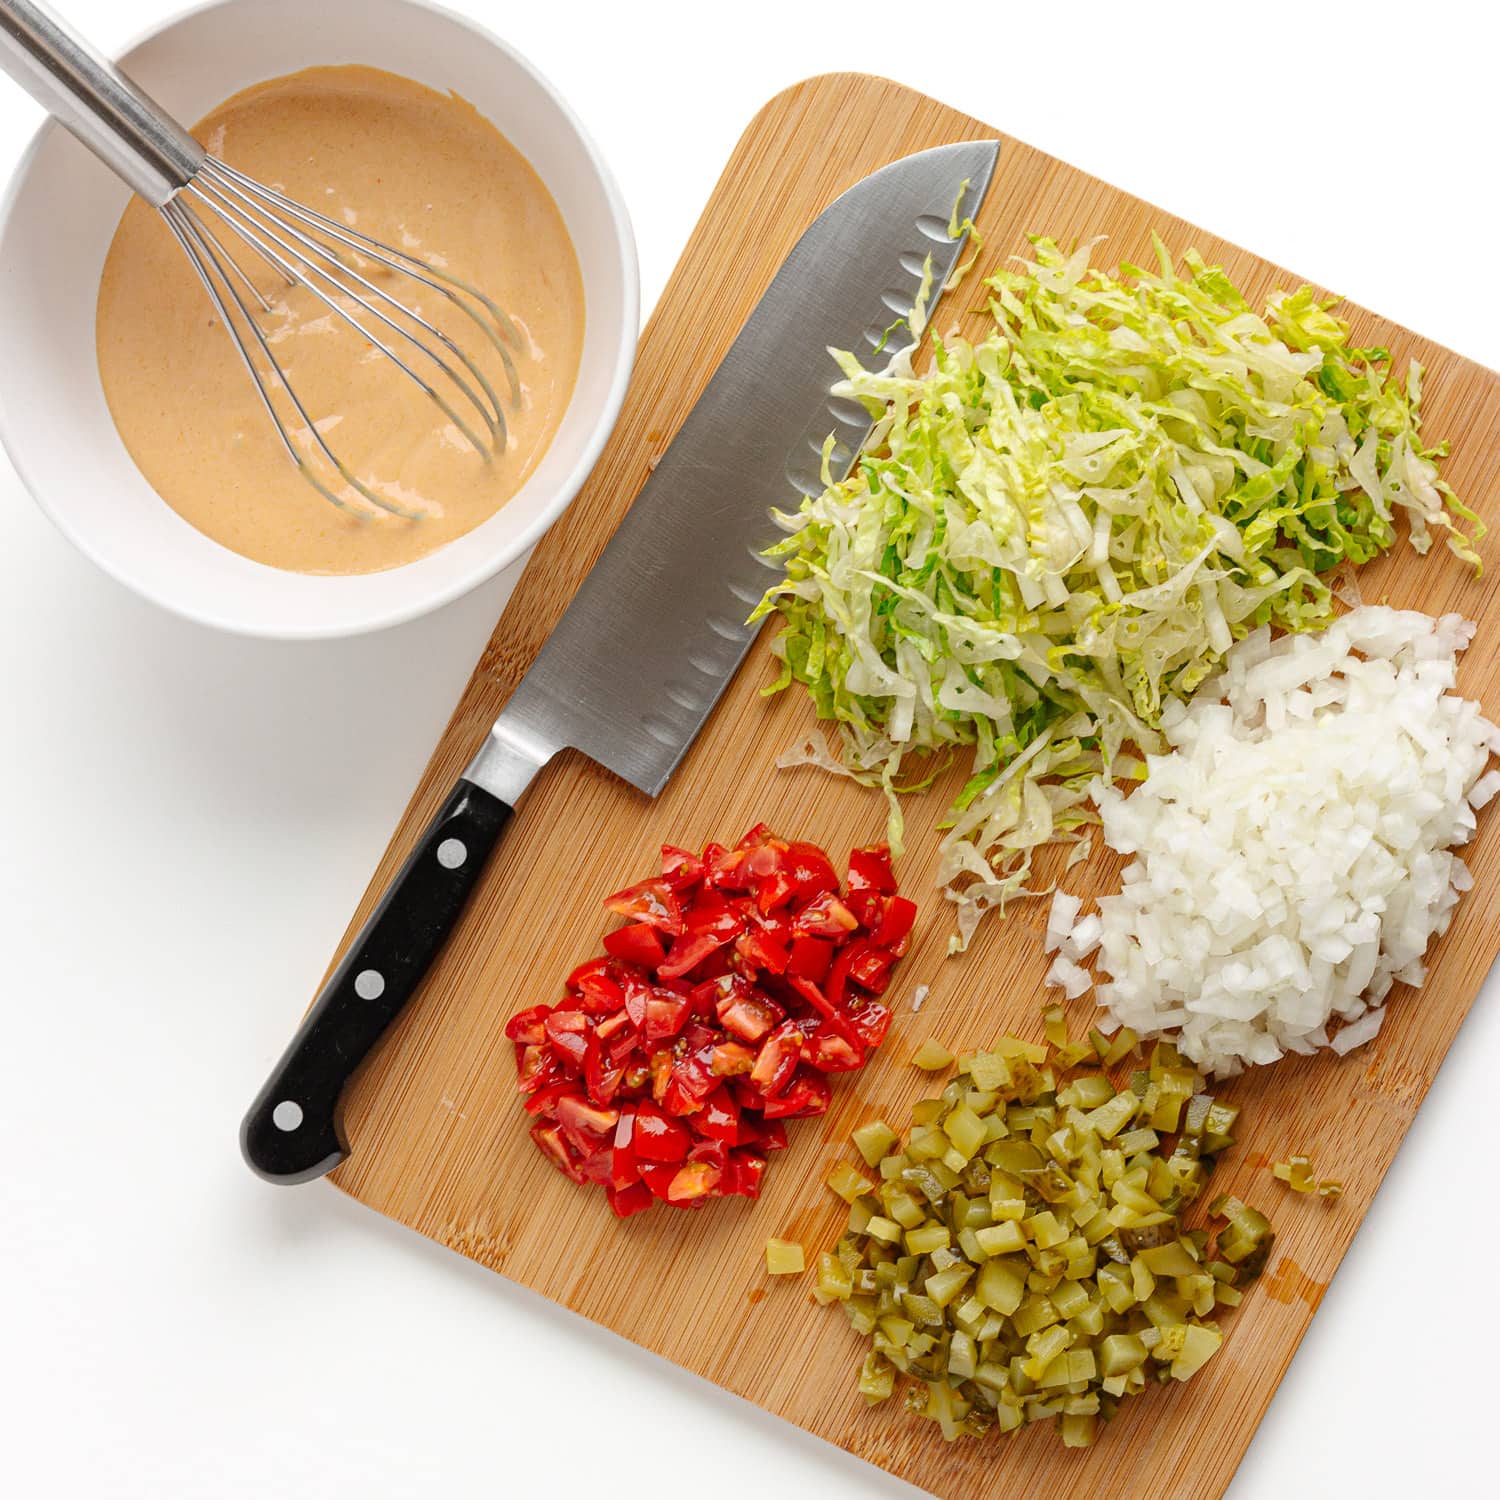 Homemade burger sauce in white bowl with whisk next to cutting board with prepped burger toppings (shredded lettuce, chopped onions, pickles and tomatoes).